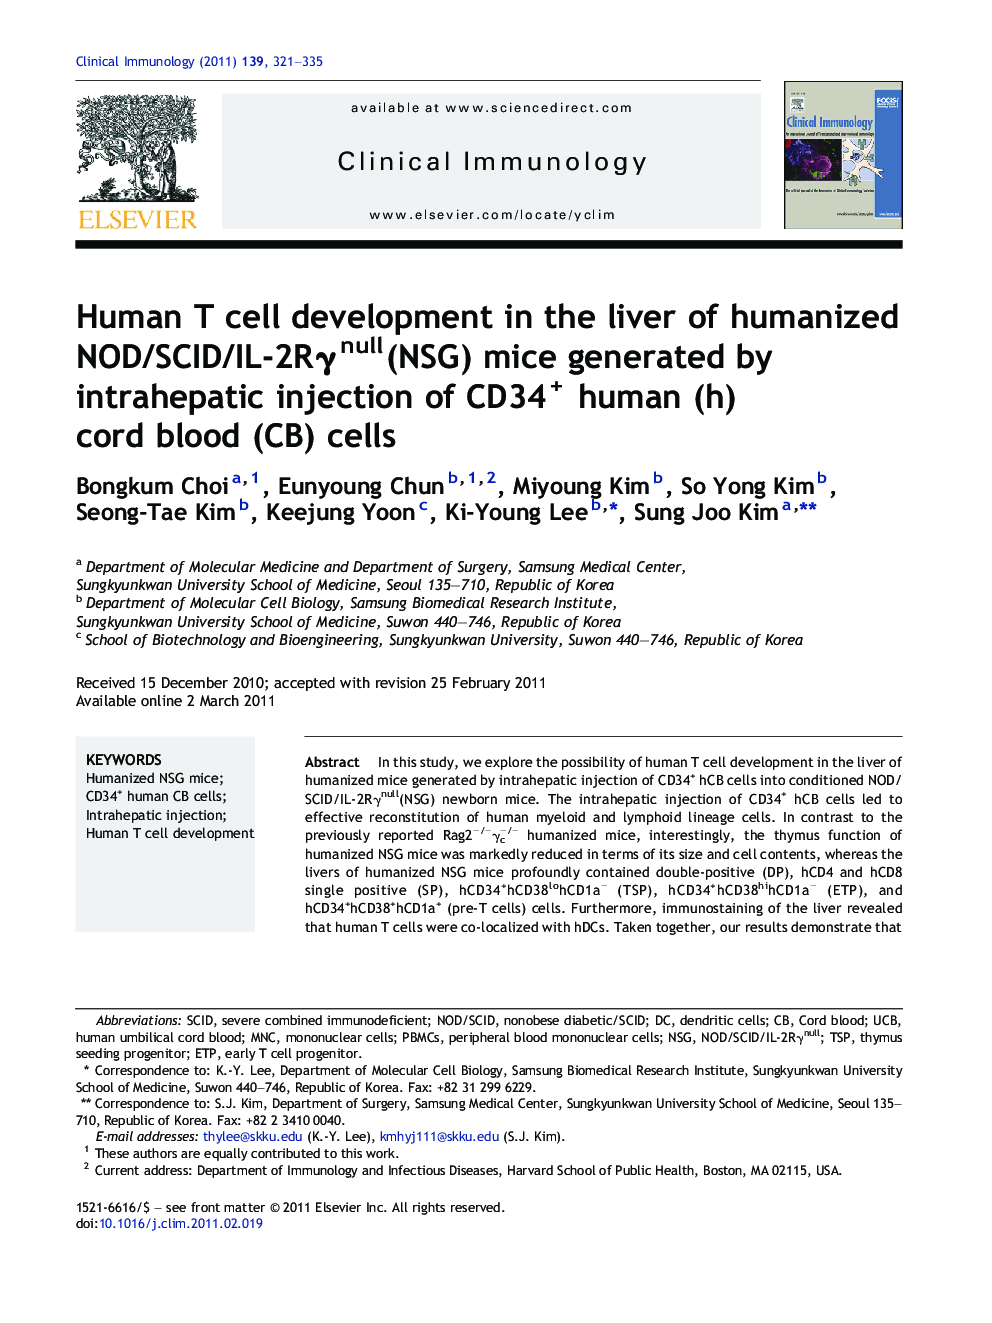 Human T cell development in the liver of humanized NOD/SCID/IL-2Rγnull(NSG) mice generated by intrahepatic injection of CD34+ human (h) cord blood (CB) cells